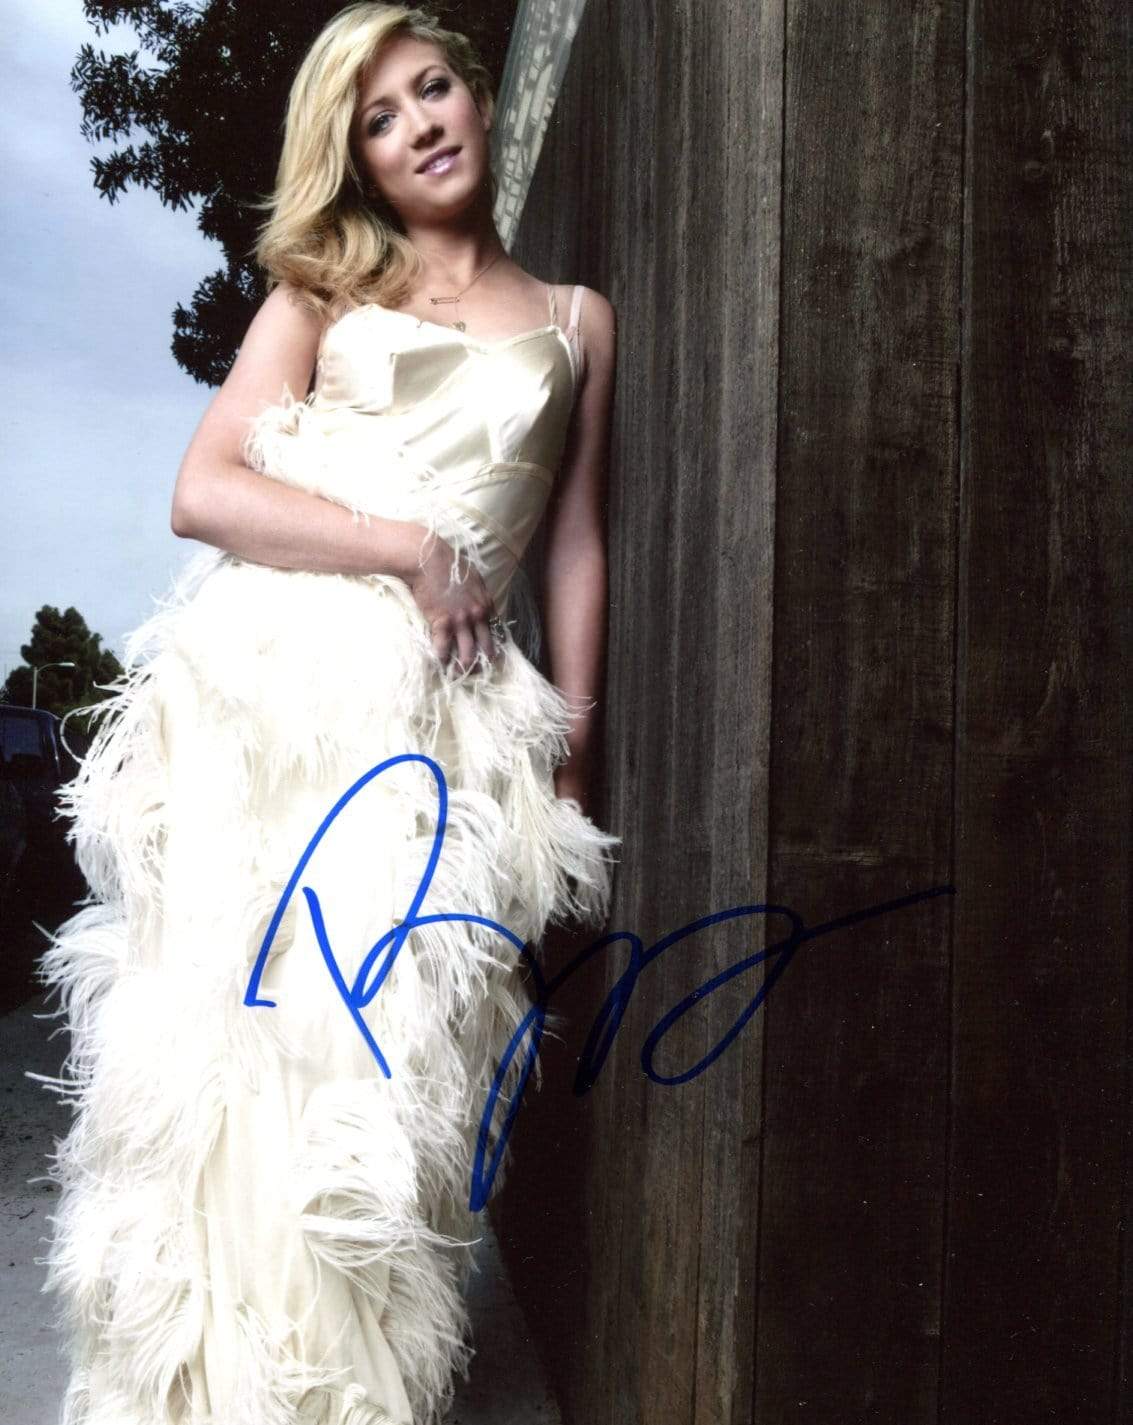 Snow, Brittany autograph